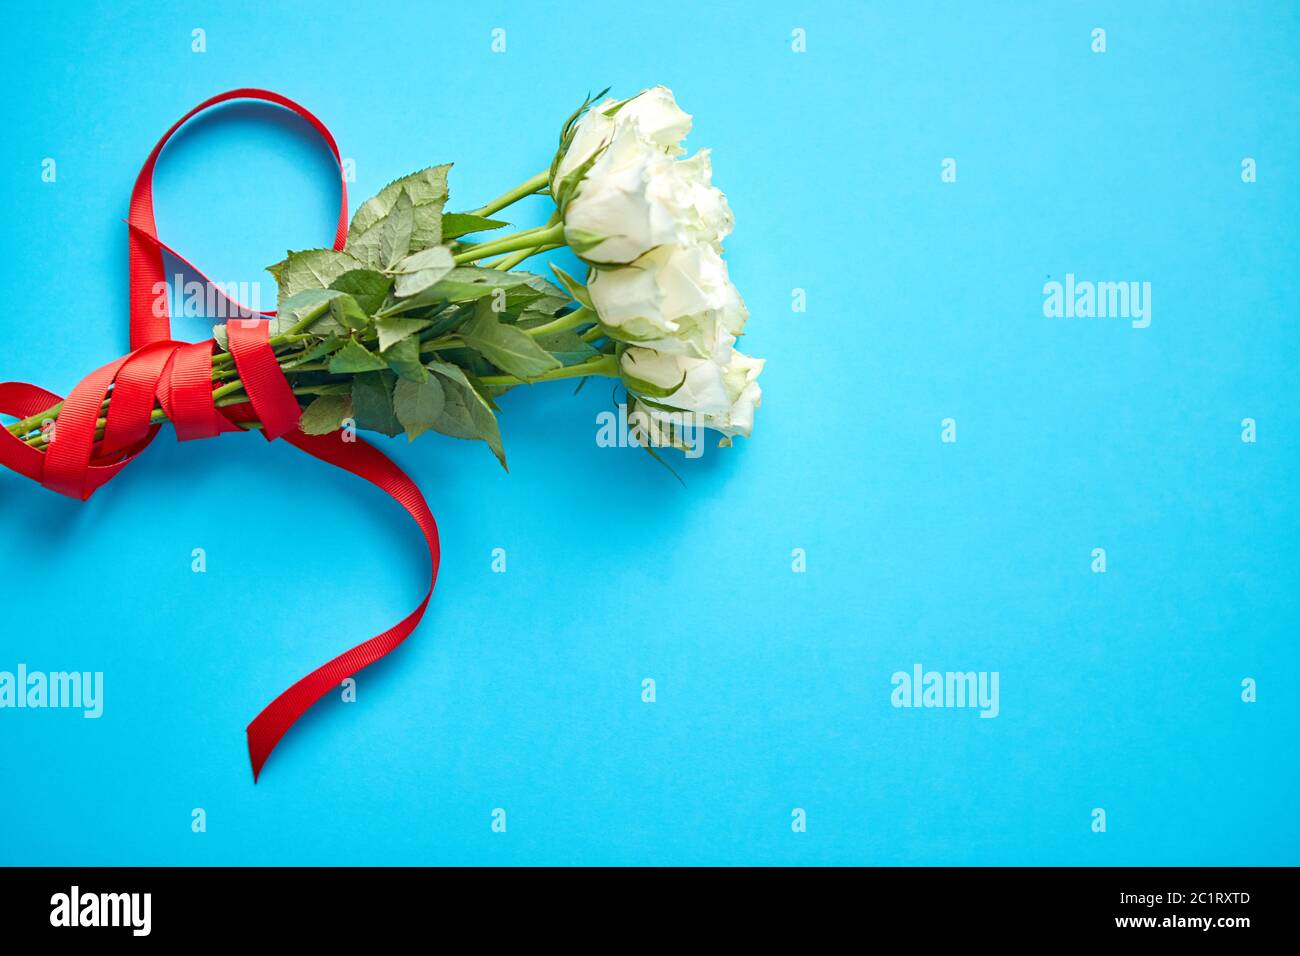 Bouquet of white roses with red bow on blue background Stock Photo